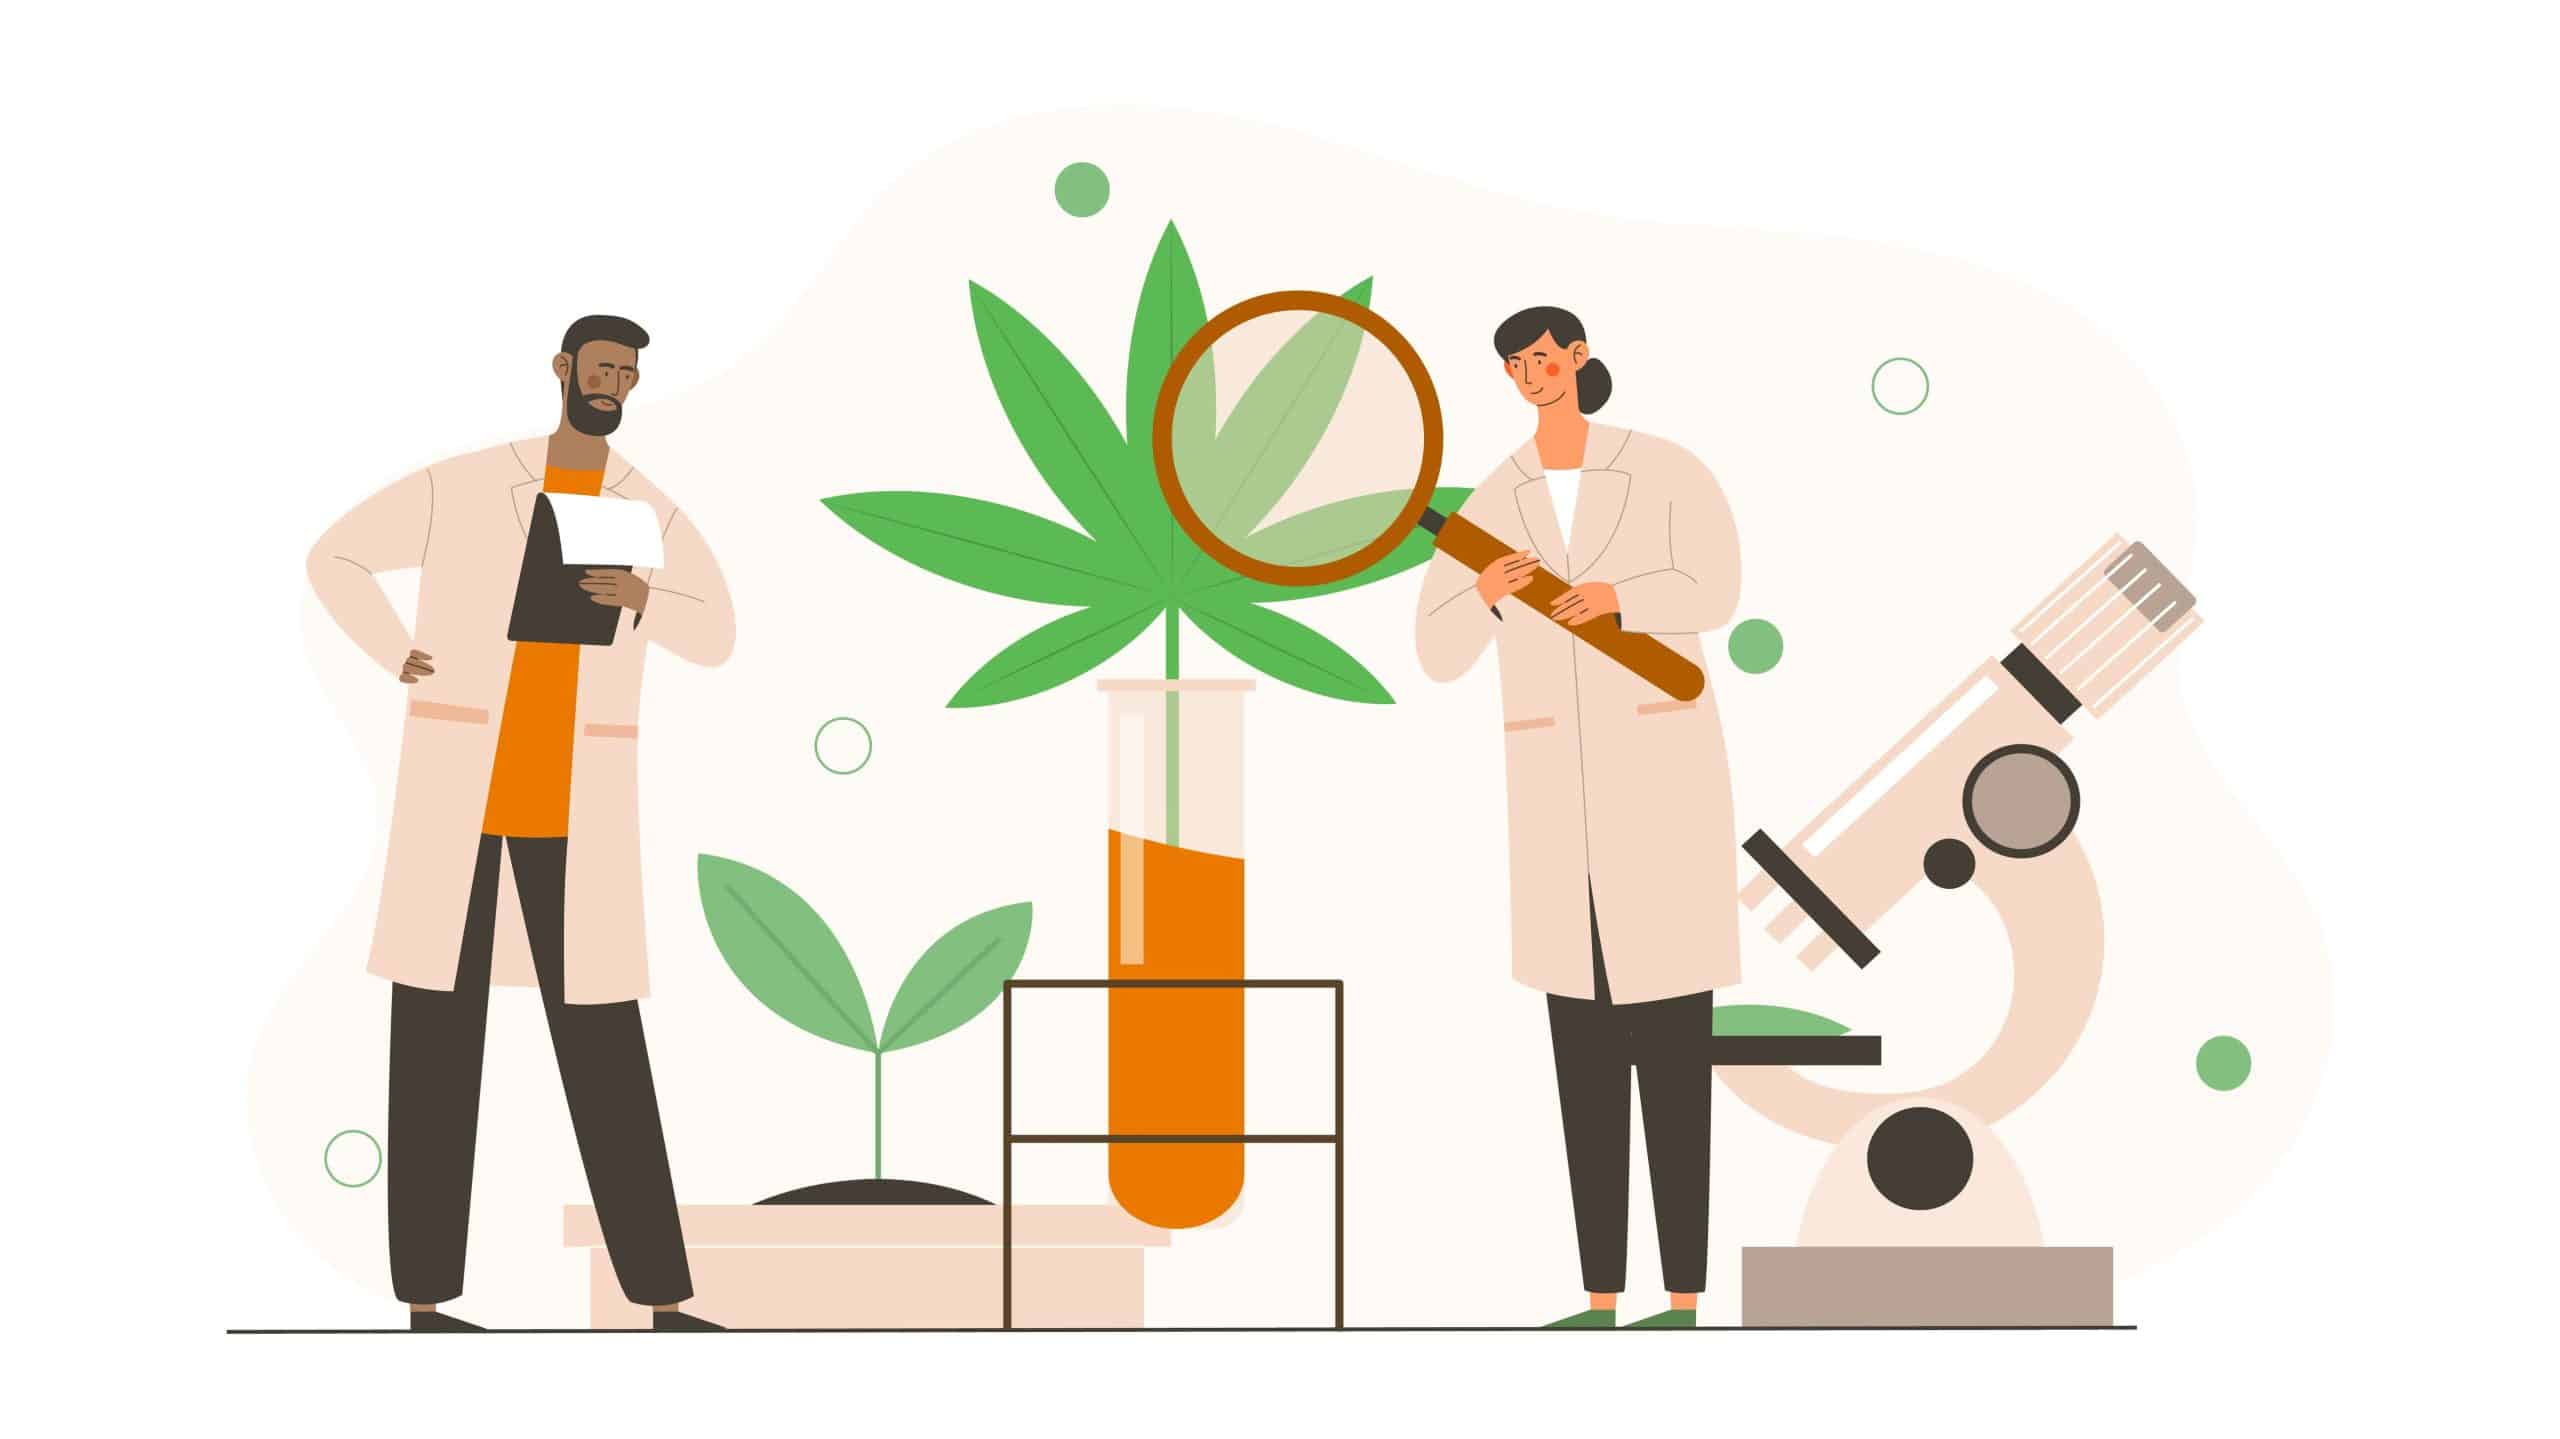 Male and female scientists in uniform are analyzing cbd hemp oil extract from marijuana plant. Researcher working in laboratory healthcare pharmacy medical cannabis. Flat cartoon vector illustration